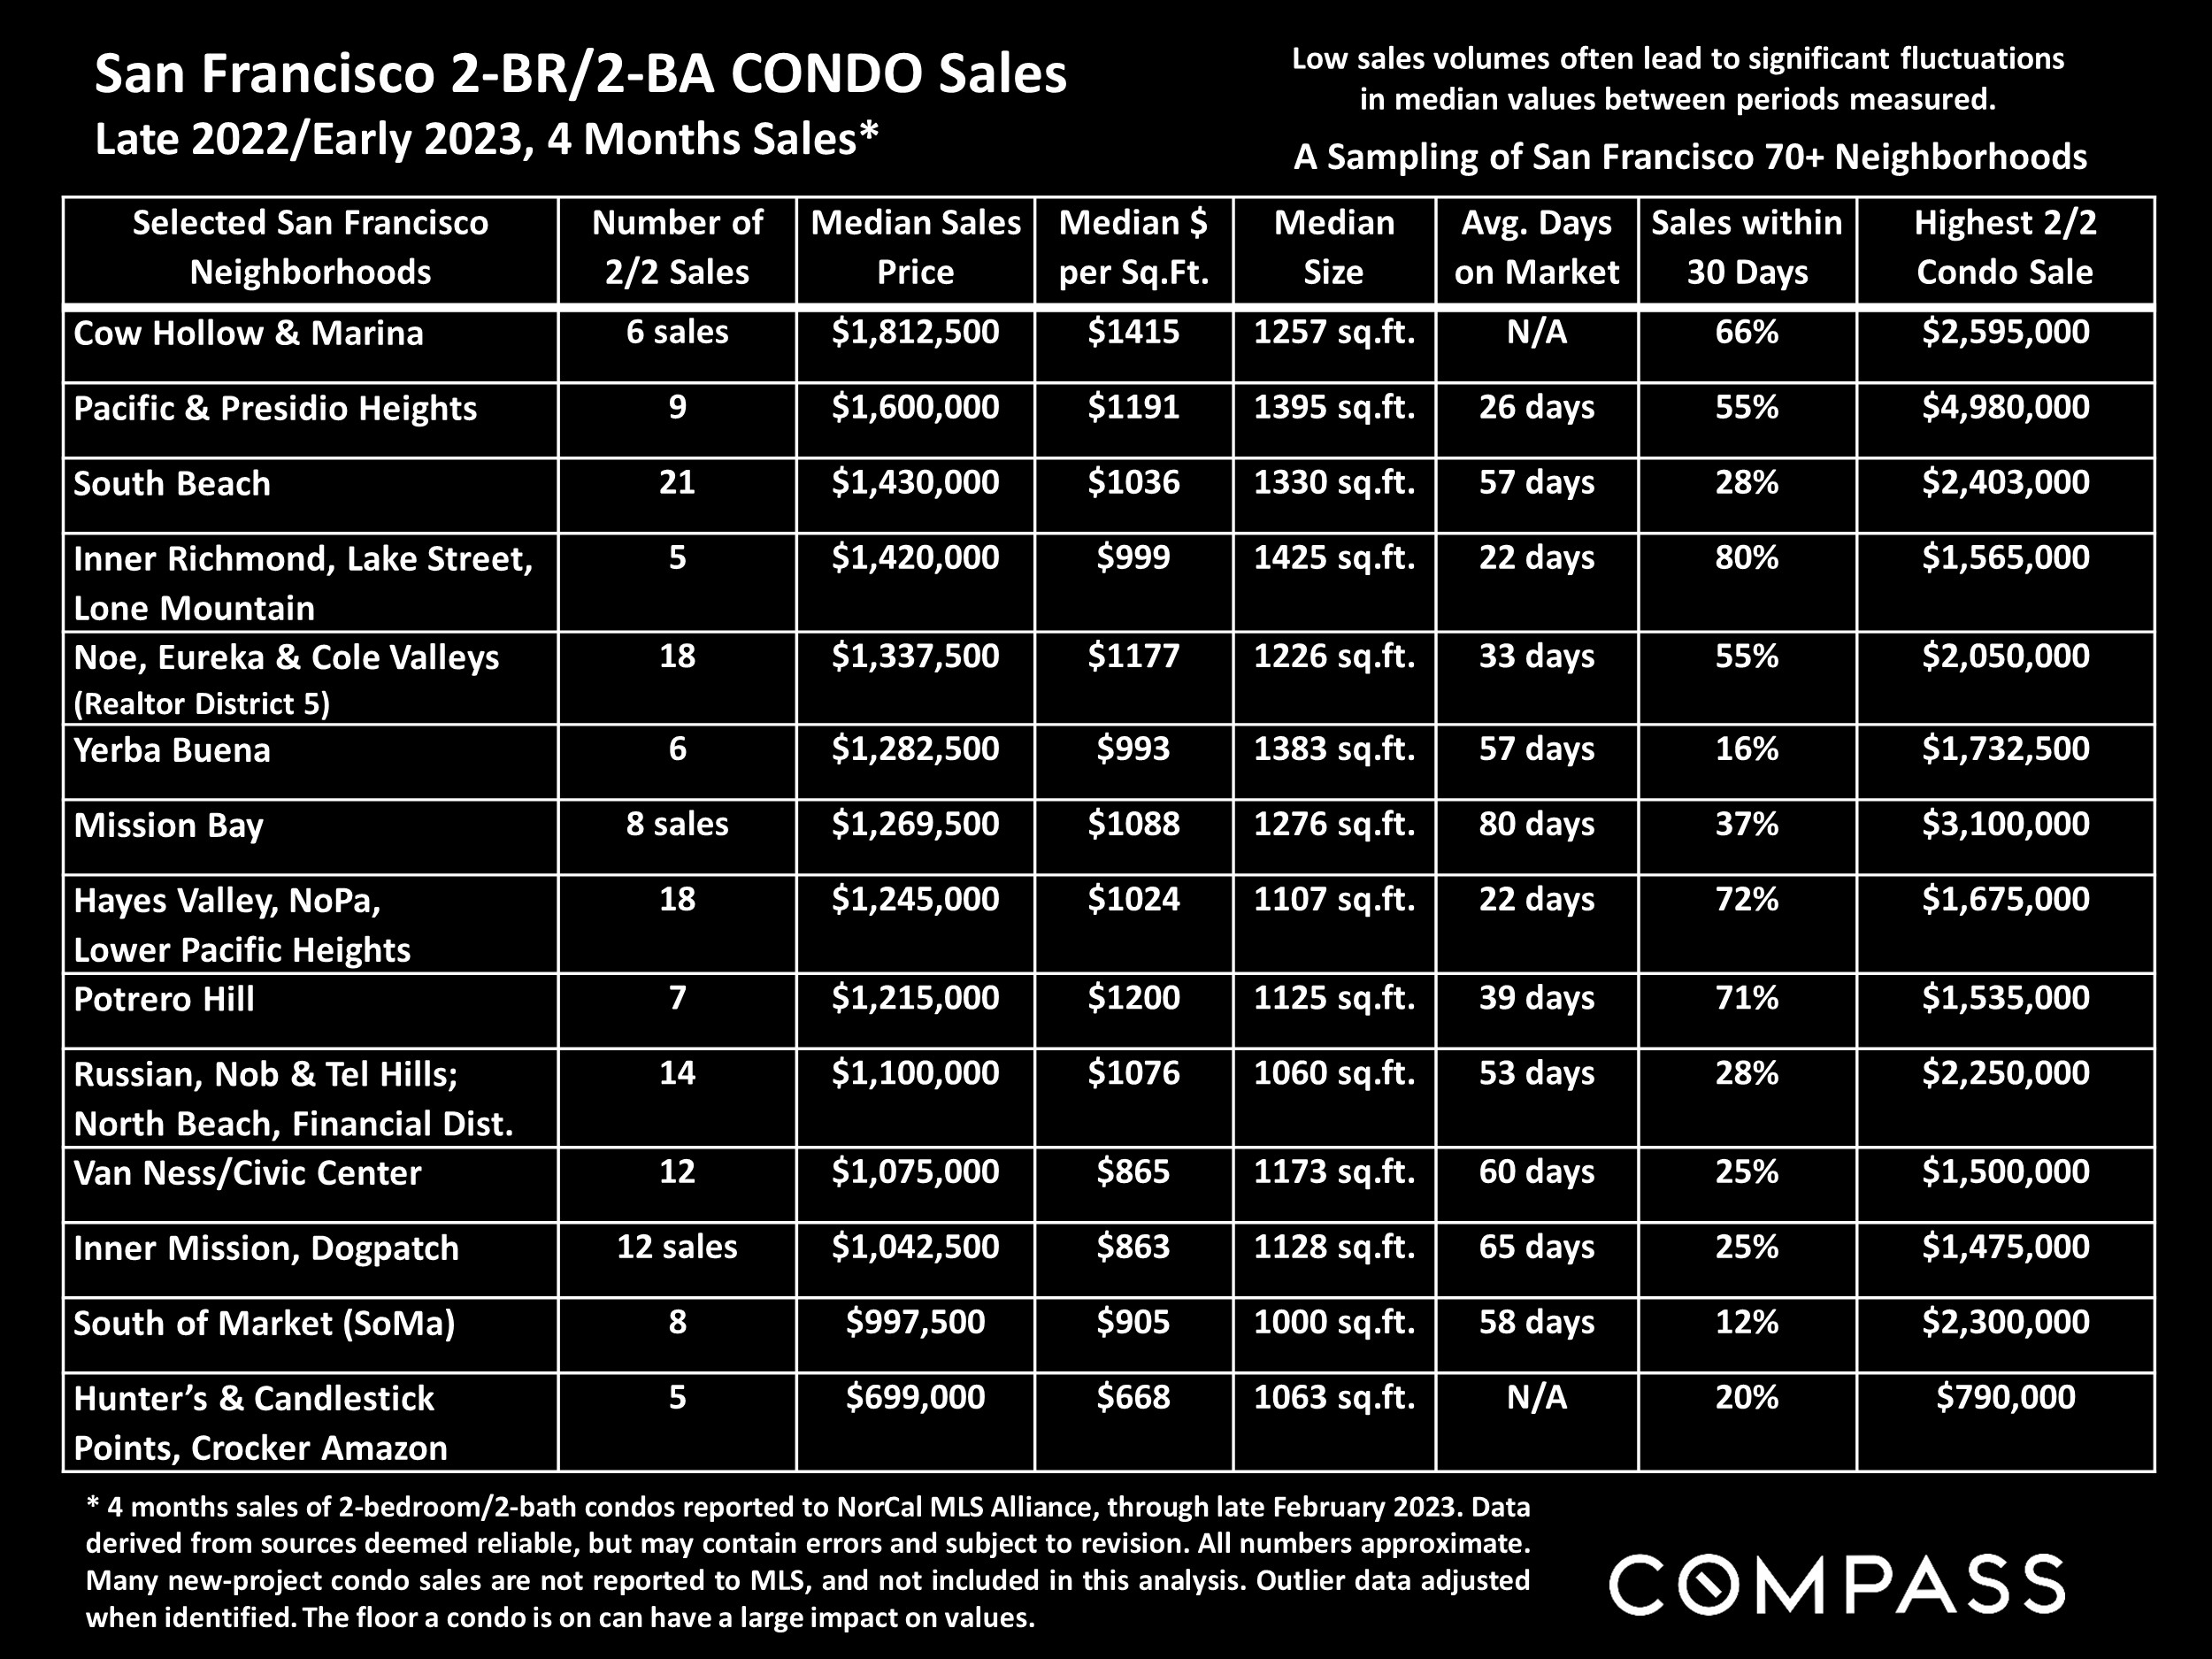 San Francisco 2-BR/2-BA CONDO Sales Late 2022/Early 2023, 4 Months Sales*